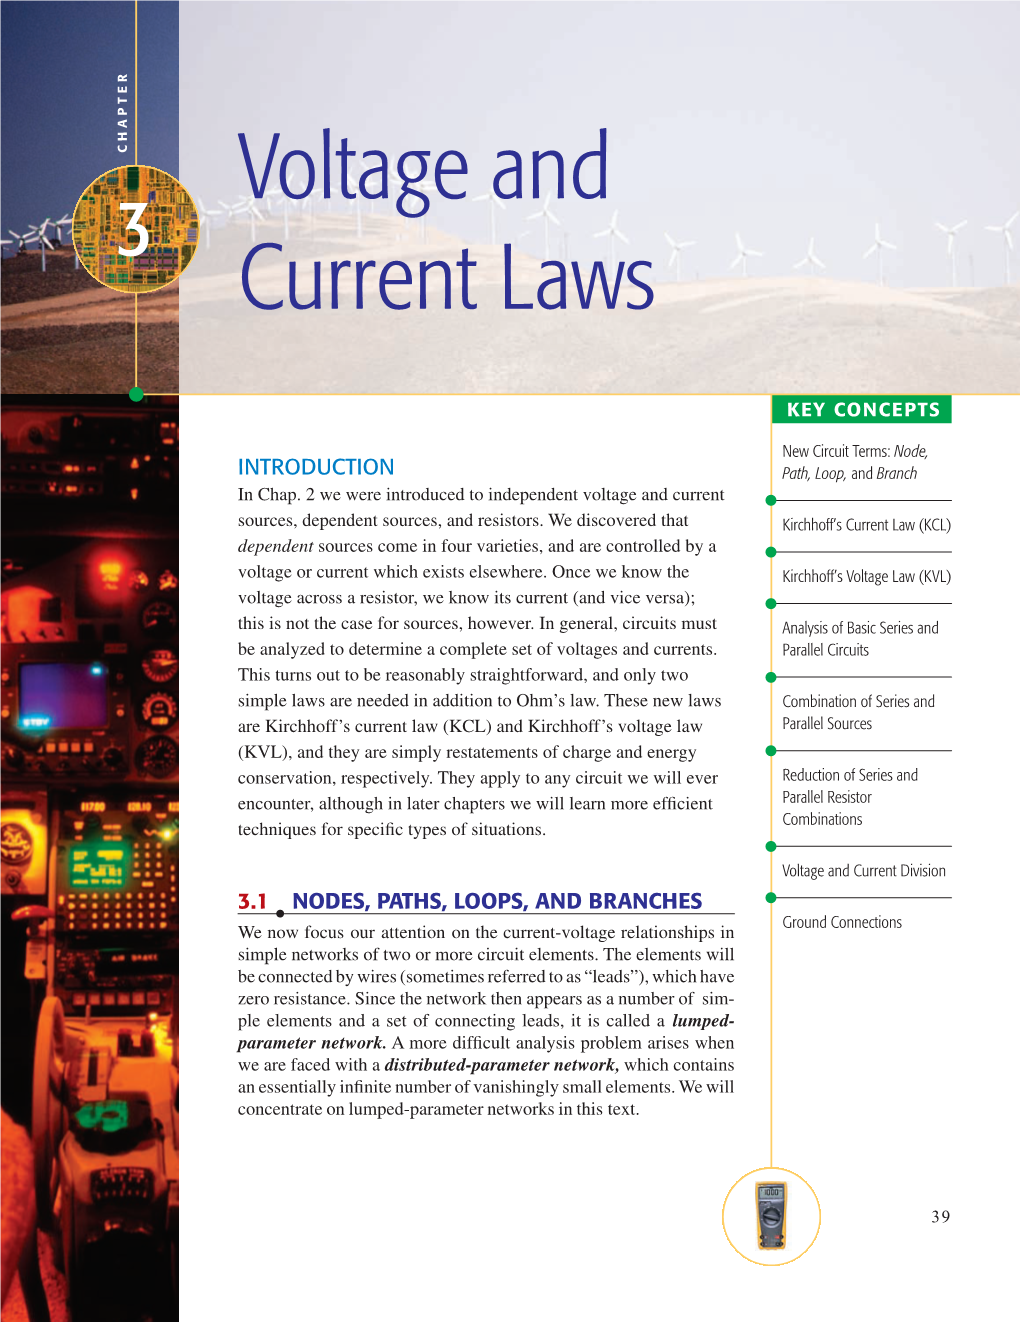 Voltage and Current Laws